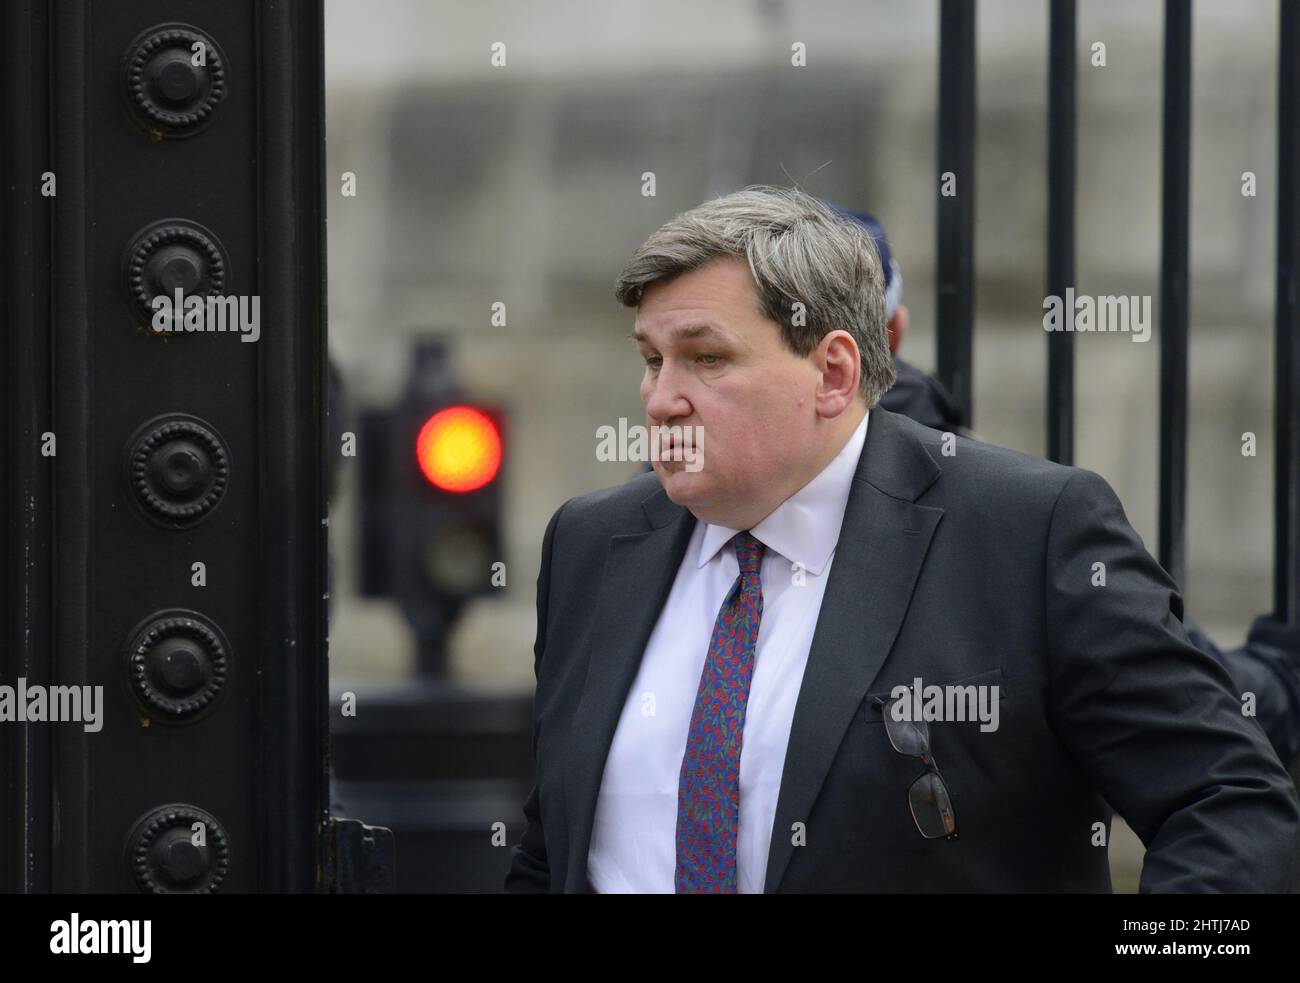 Kit Malthouse MP - Minister of State (Minister for Crime and Policing) - leaving Downing Street via Horse Guards Road after a cabinet meeting, 28th Fe Stock Photo